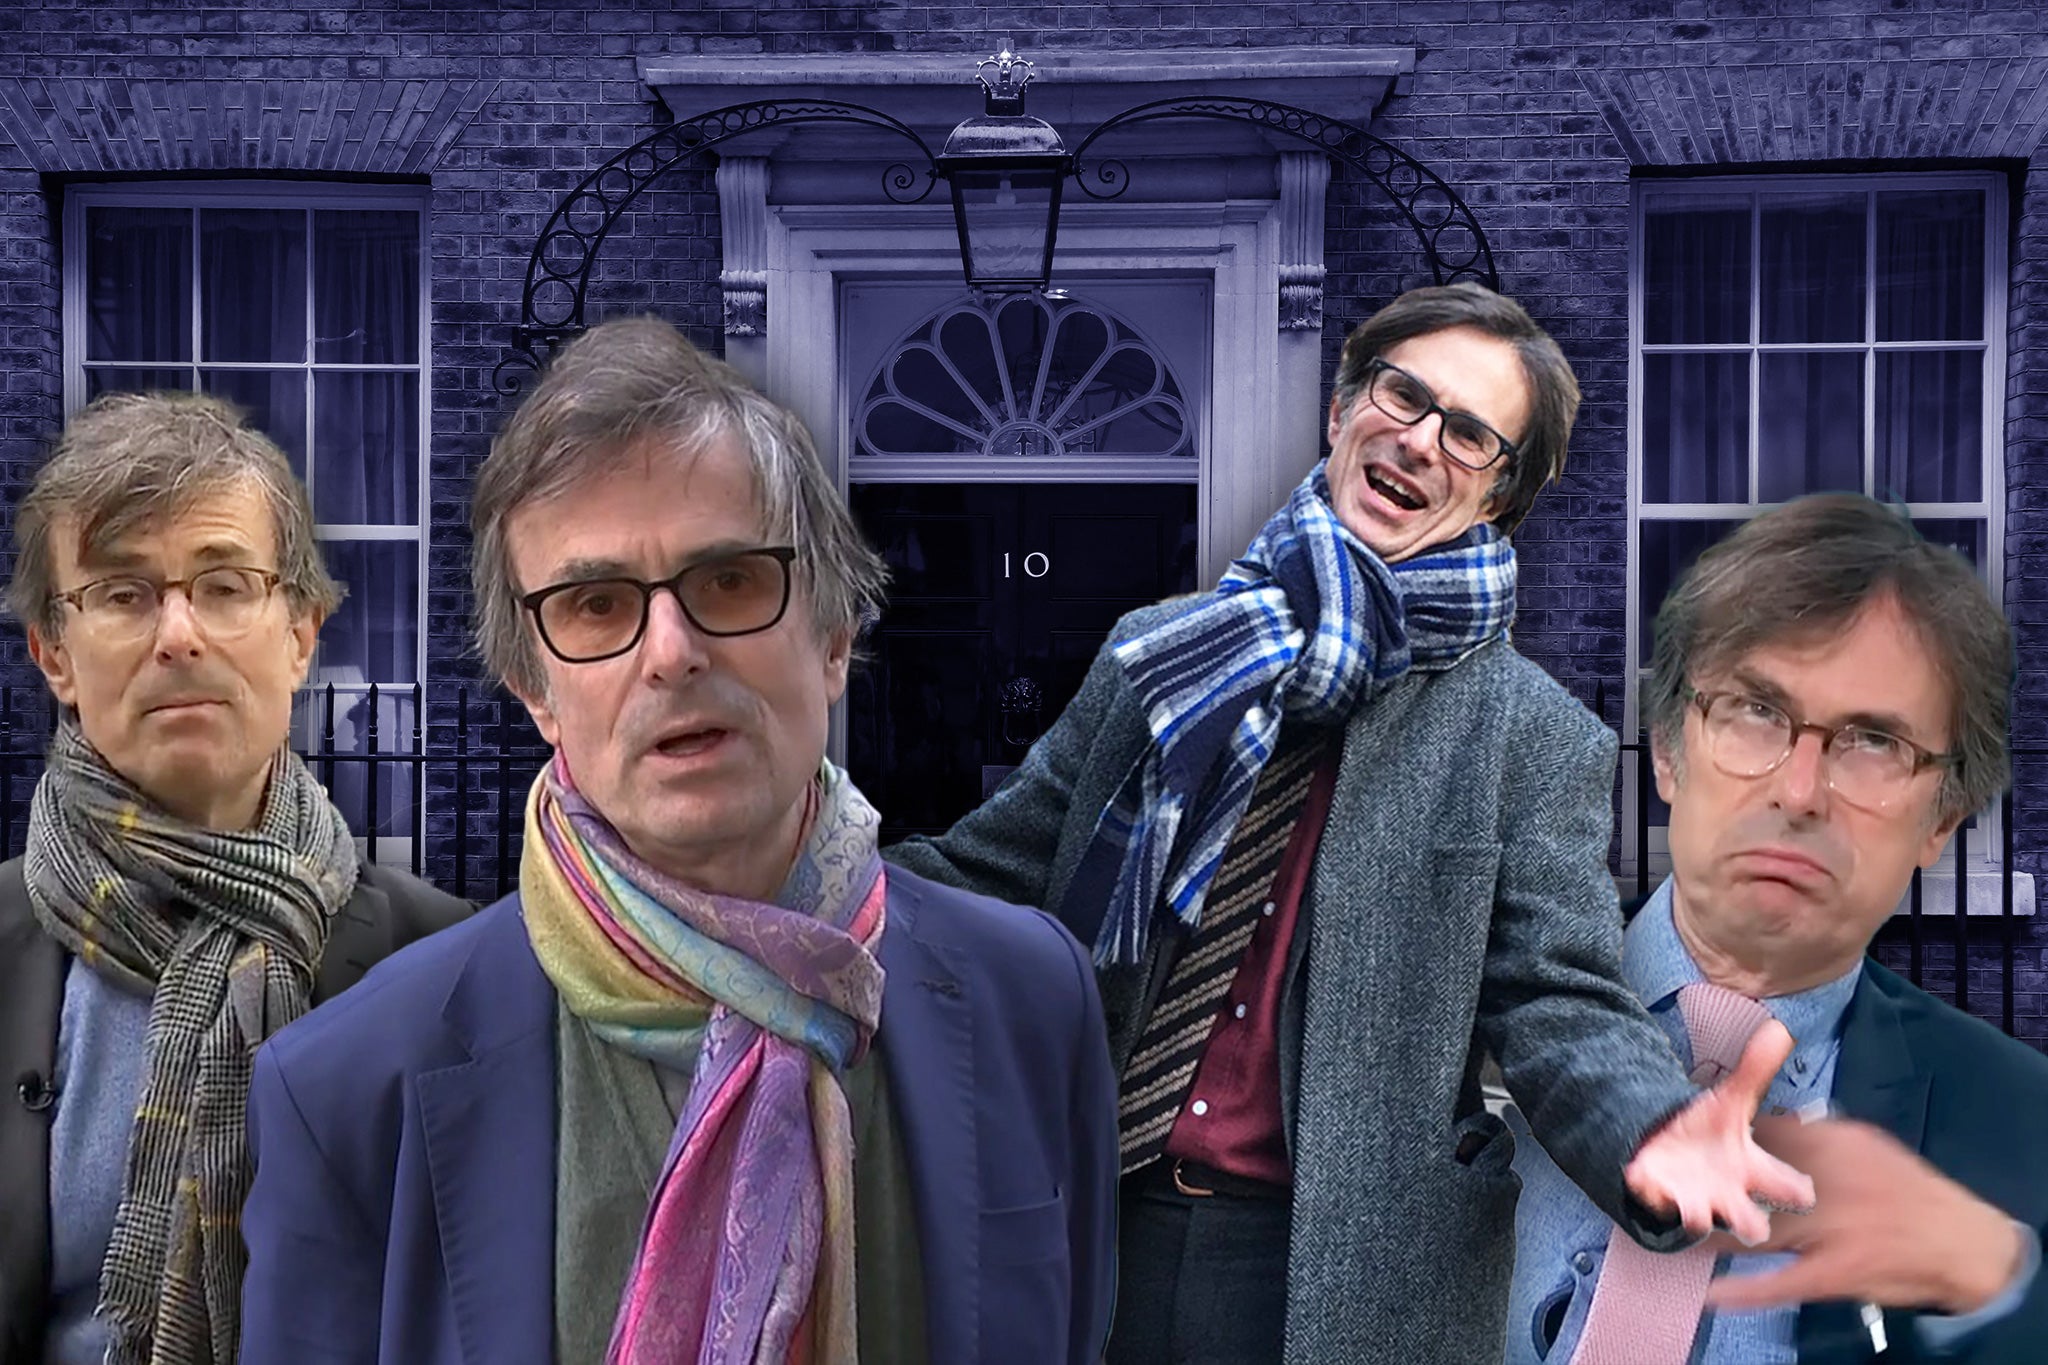 Peston’s penchant for flamboyant scarves and ties is a (sometimes) welcome distraction from the grim political news